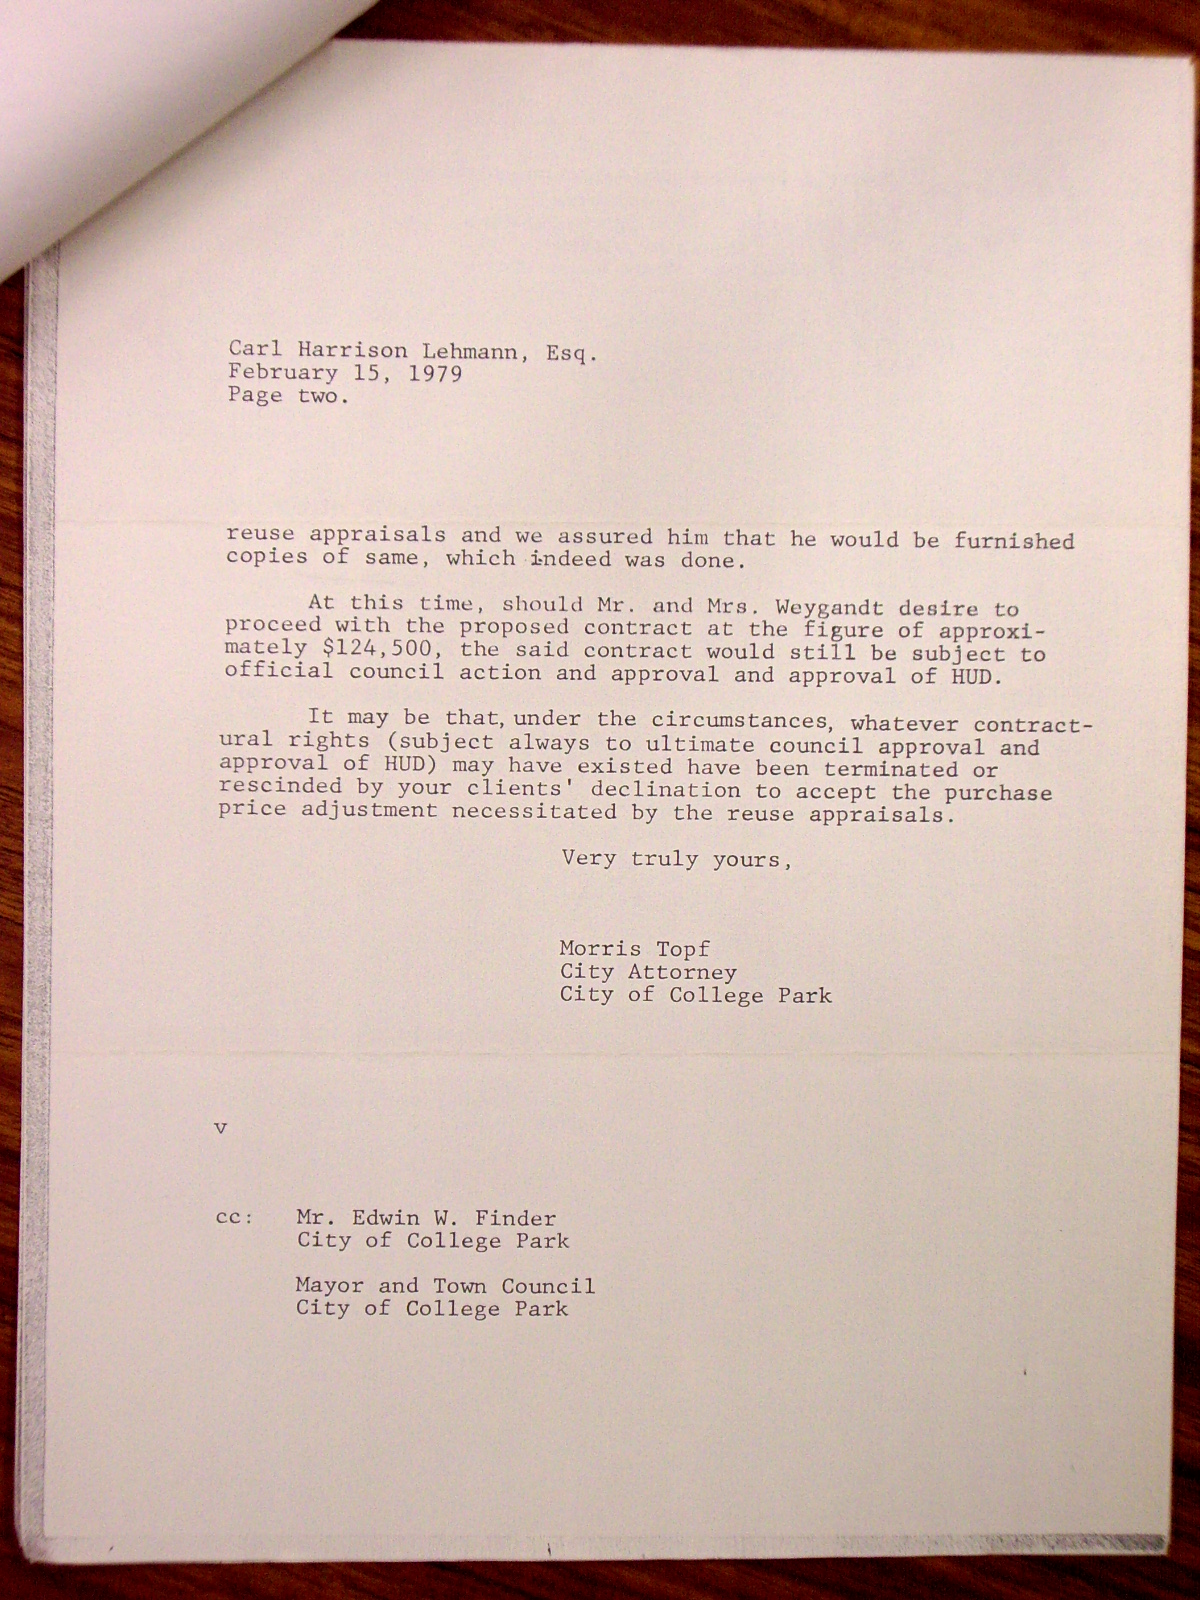 Letter from Morris Topf to Carl Harrison Lehmann, attached to a memo from Topf to Edwin Finder, enclosing an original letter from Lehmann to Topf